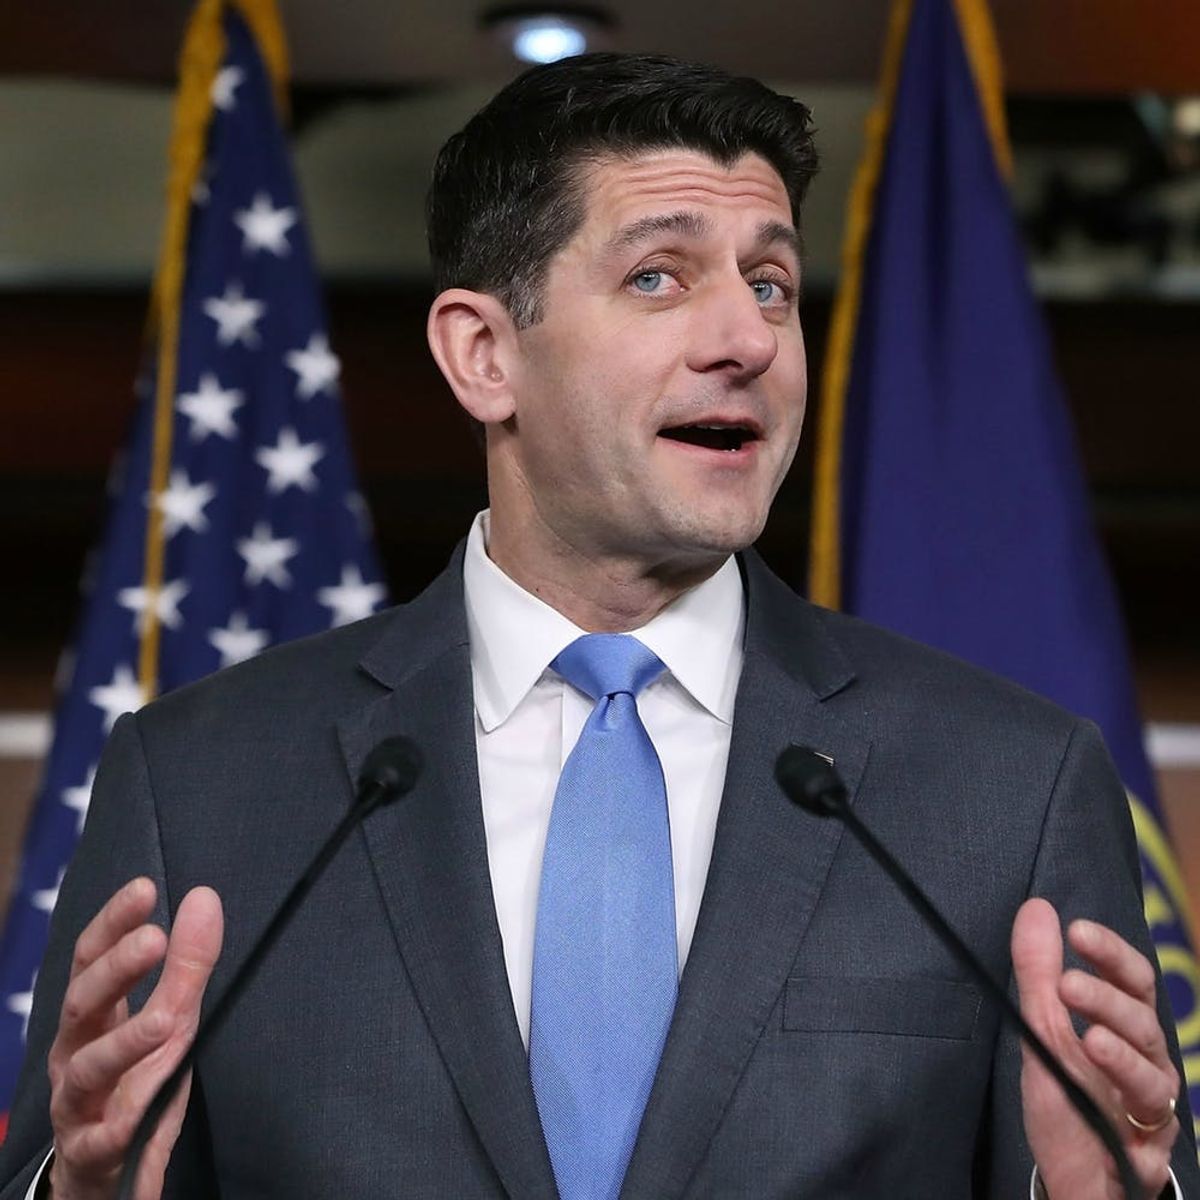 What Paul Ryan’s Departure From the House Means for Midterm Elections